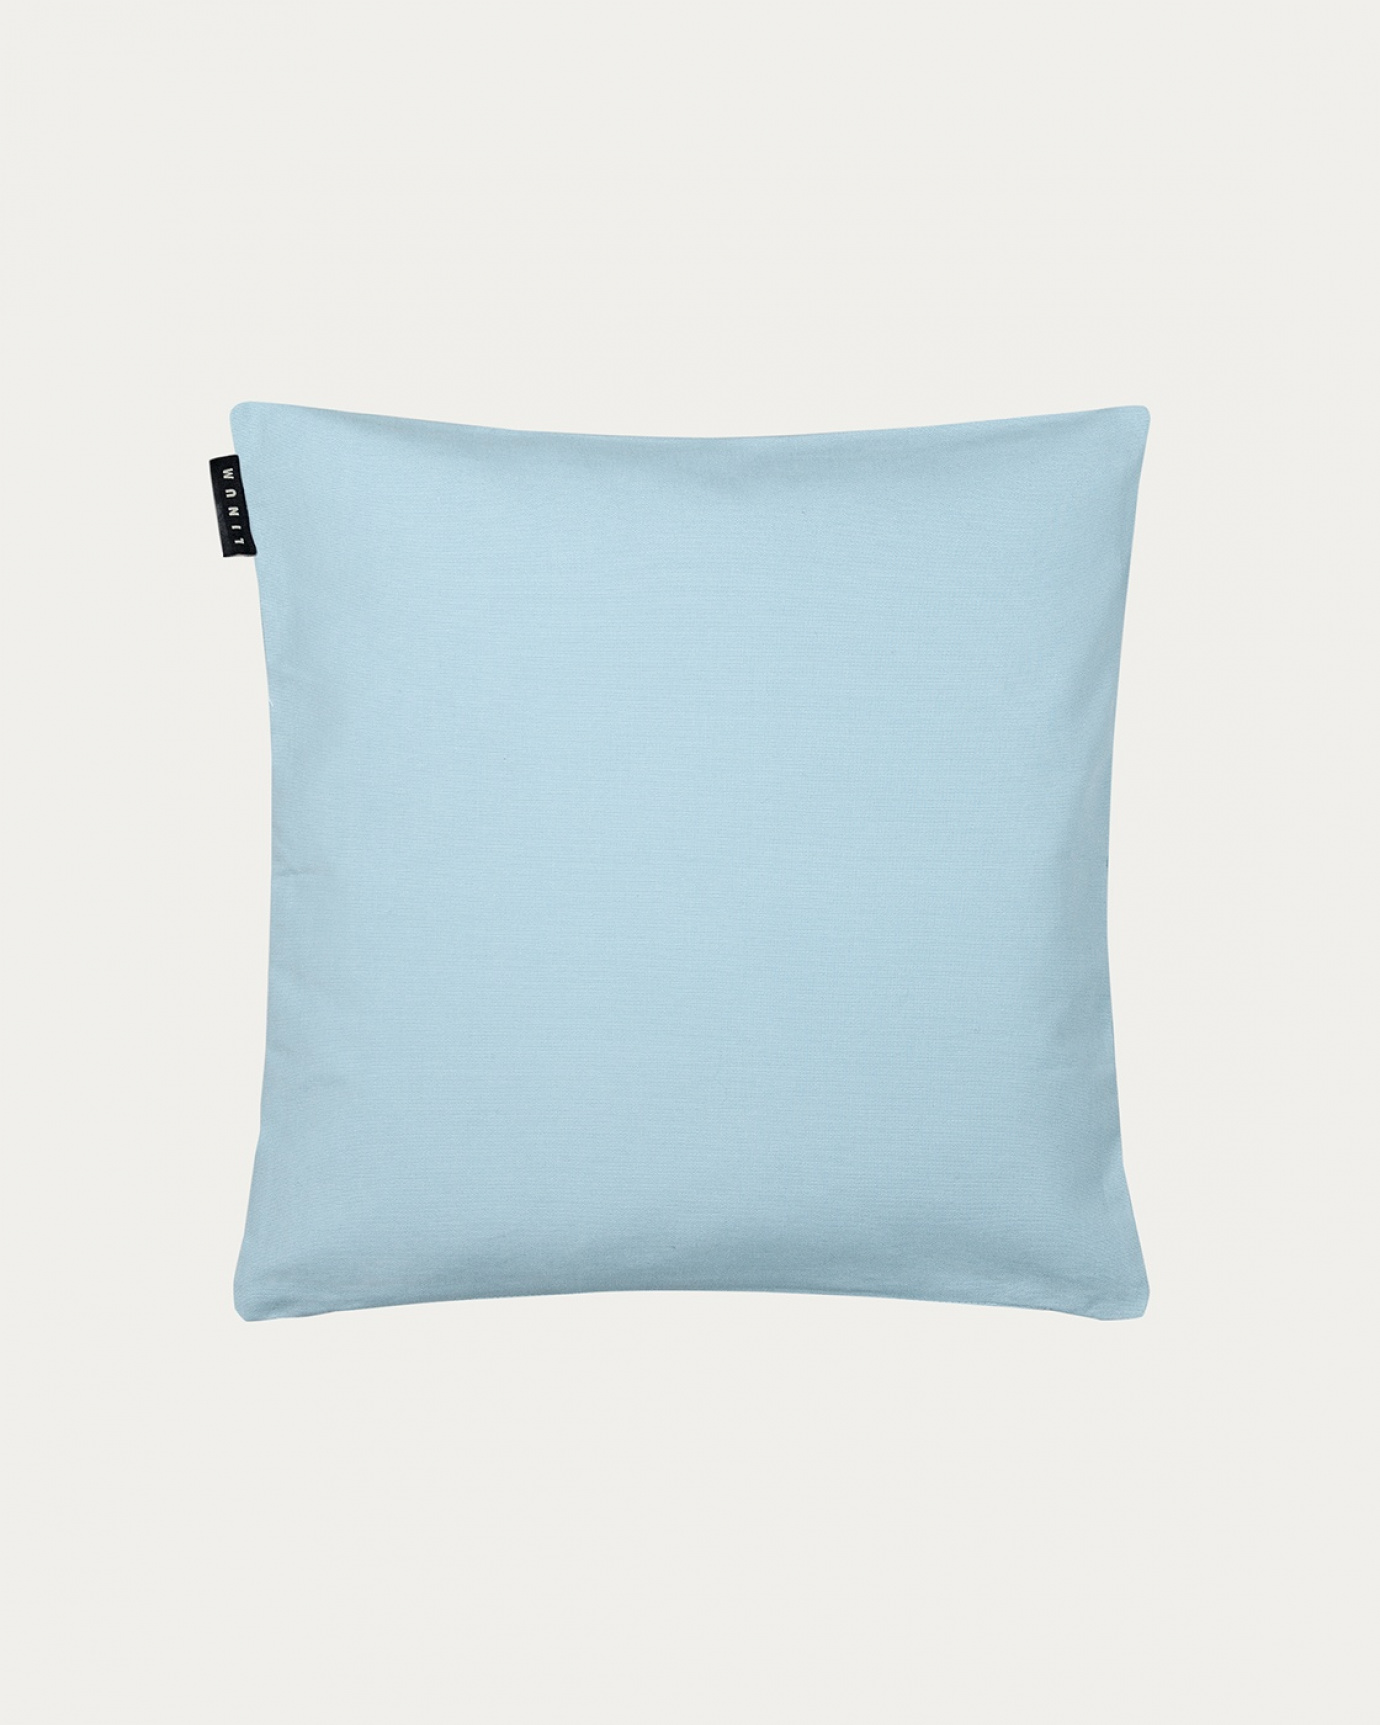 Product image light grey blue ANNABELL cushion cover made of soft cotton from LINUM DESIGN. Size 40x40 cm.